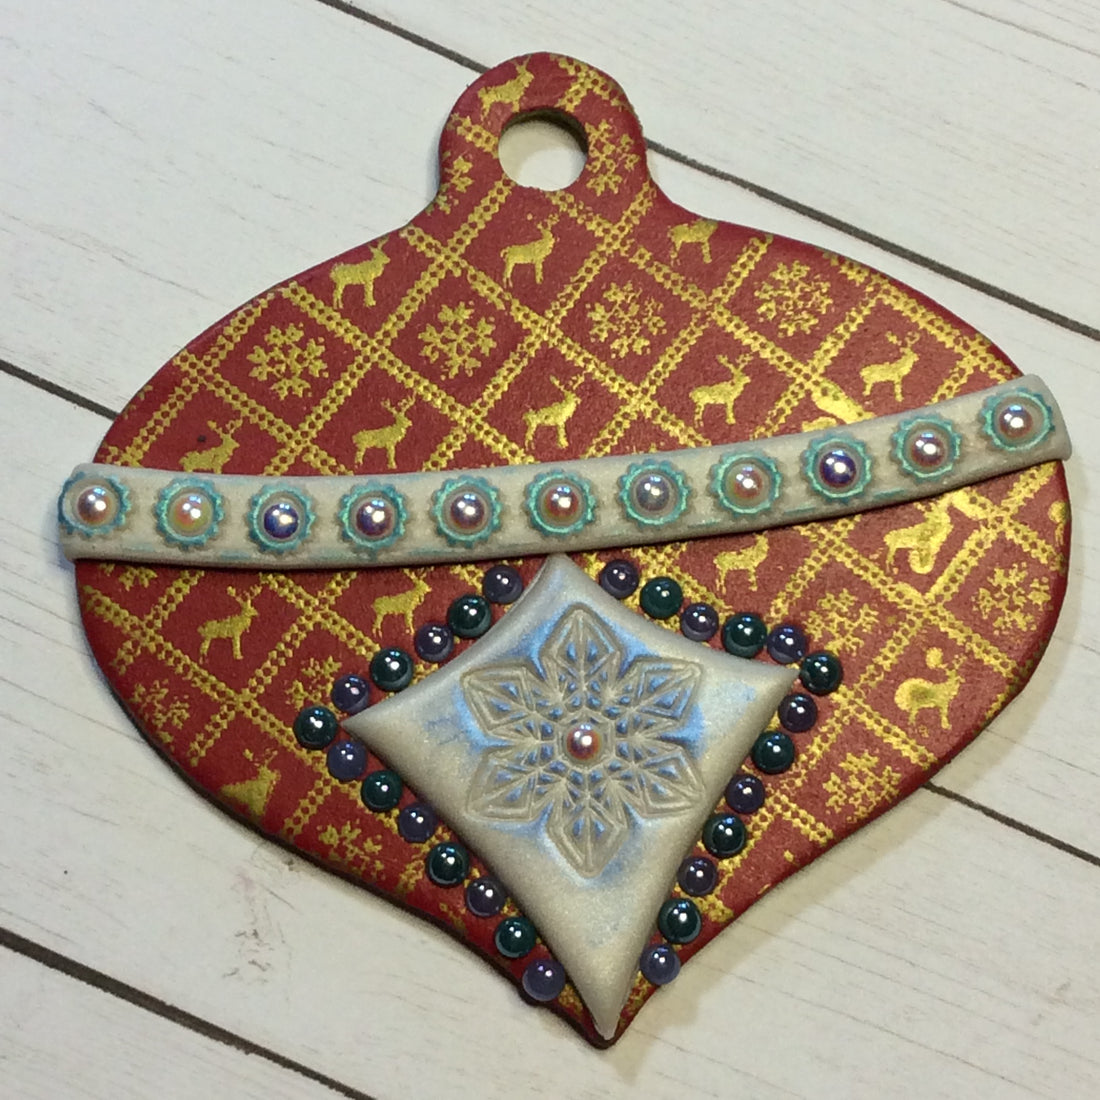 Create a silkscreend wood gift tag or holiday ornament with polymer clay